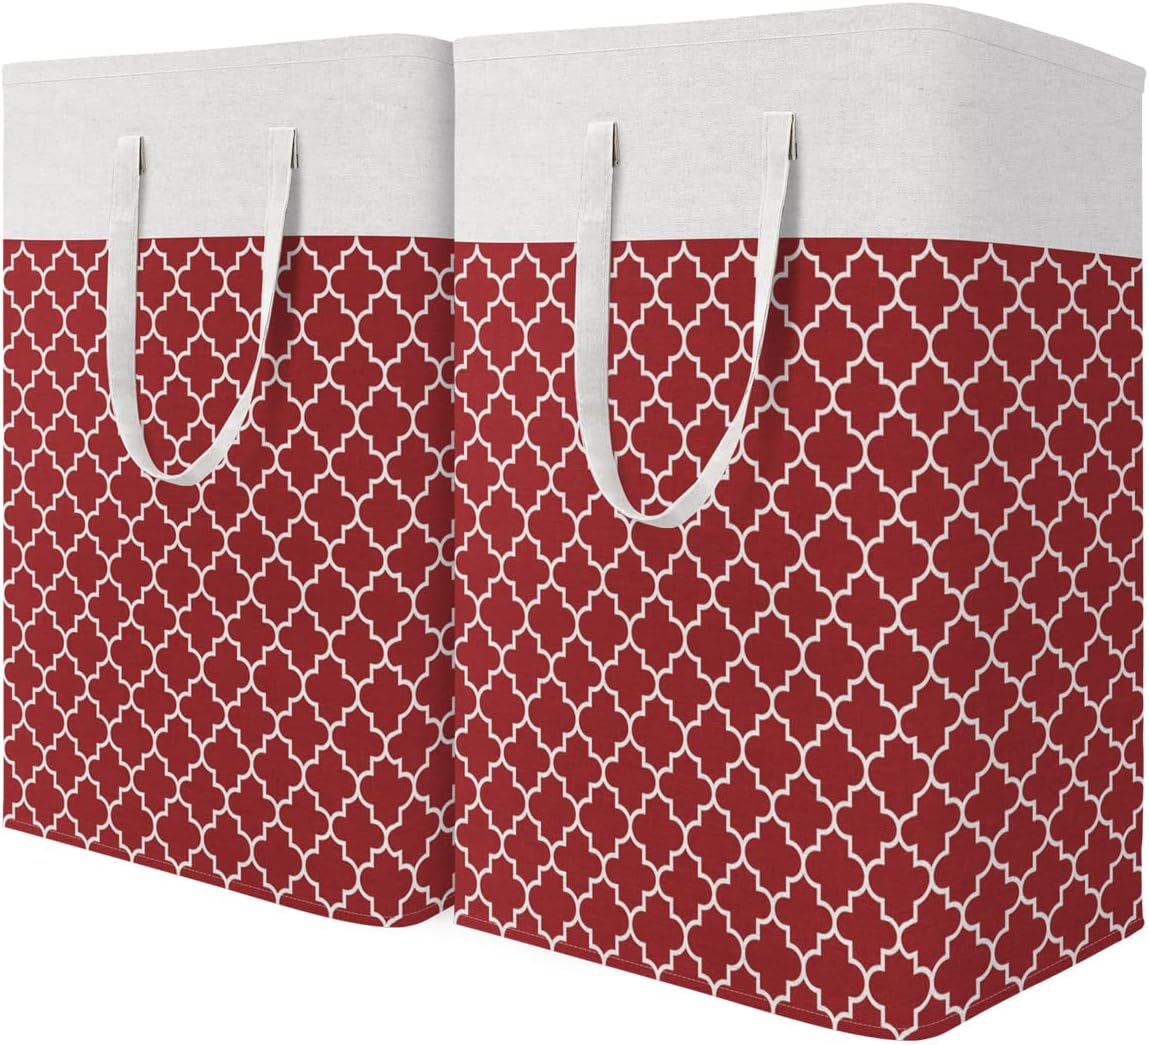 I recently purchased a set of two laundry baskets, and I must say, it was an excellent deal that exceeded my expectations. The simplicity and functionality of these baskets make them an ideal addition to any home.First and foremost, the space-saving design of these laundry baskets caught my attention. Living in a compact space, I'm always on the lookout for items that can efficiently utilize the available room. These baskets fit the bill perfectly. When not in use, they can be collapsed, allowin